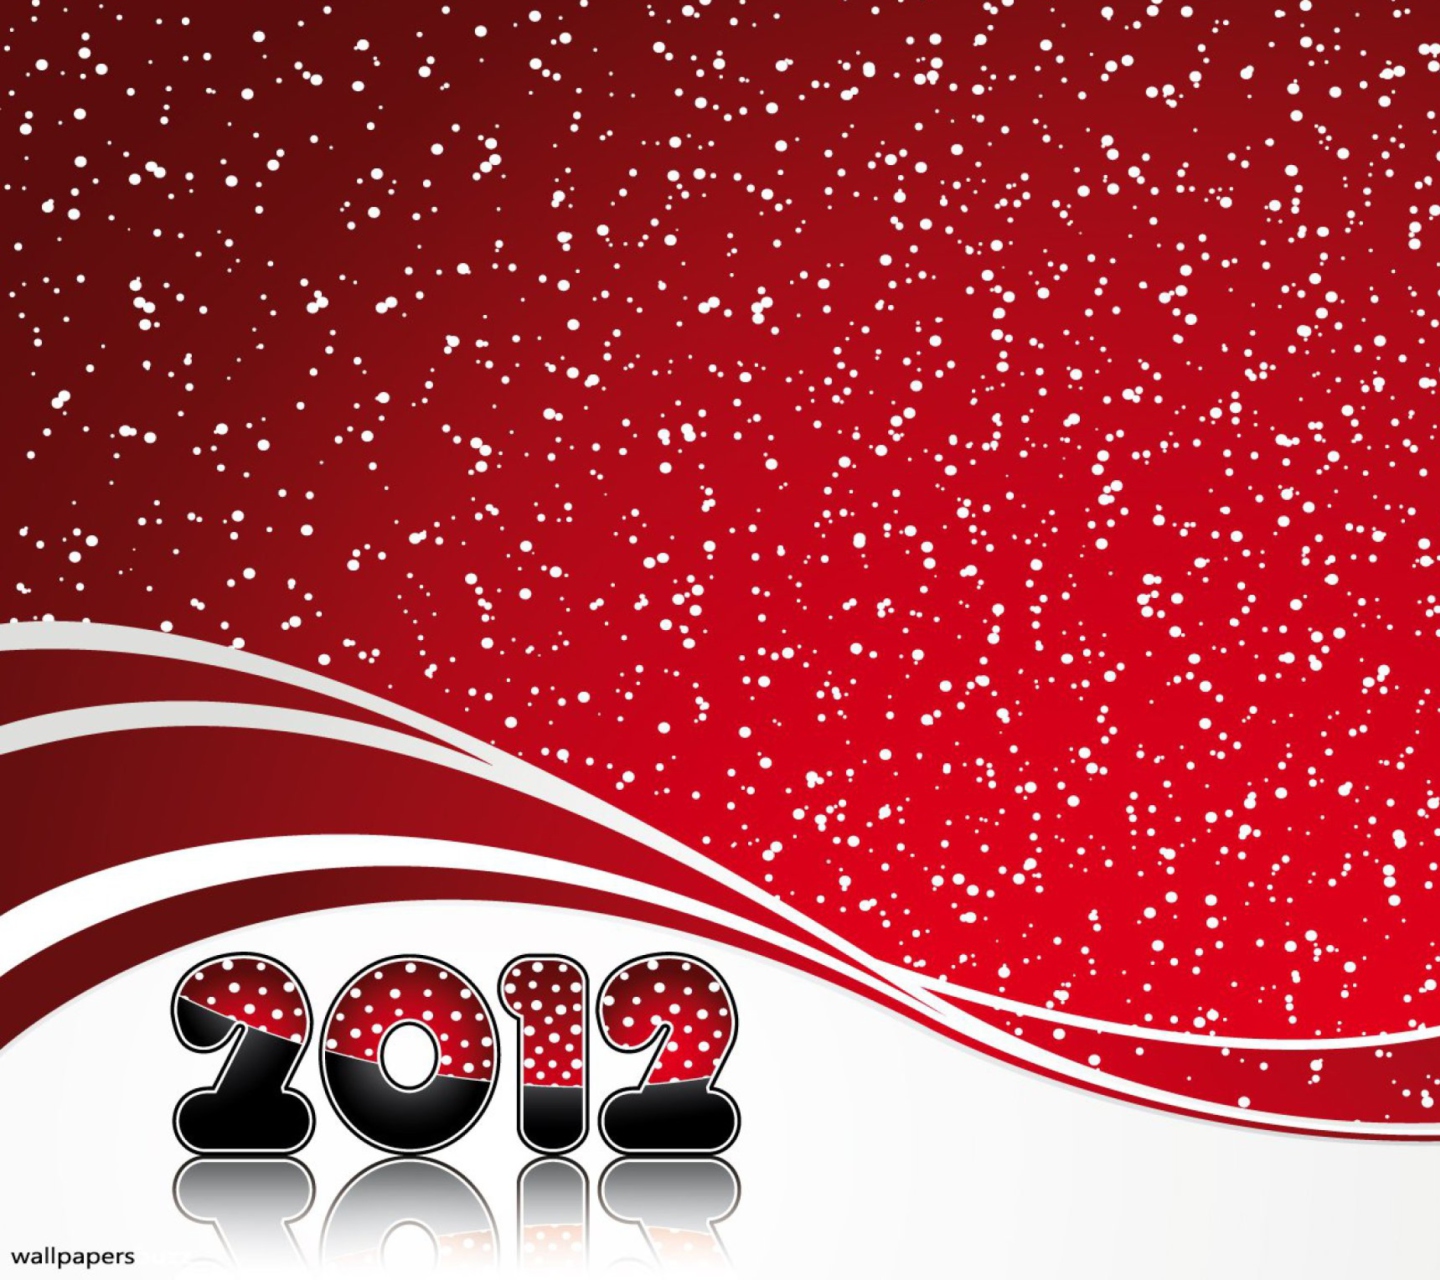 Das Red Snow New Year Wallpaper 1440x1280